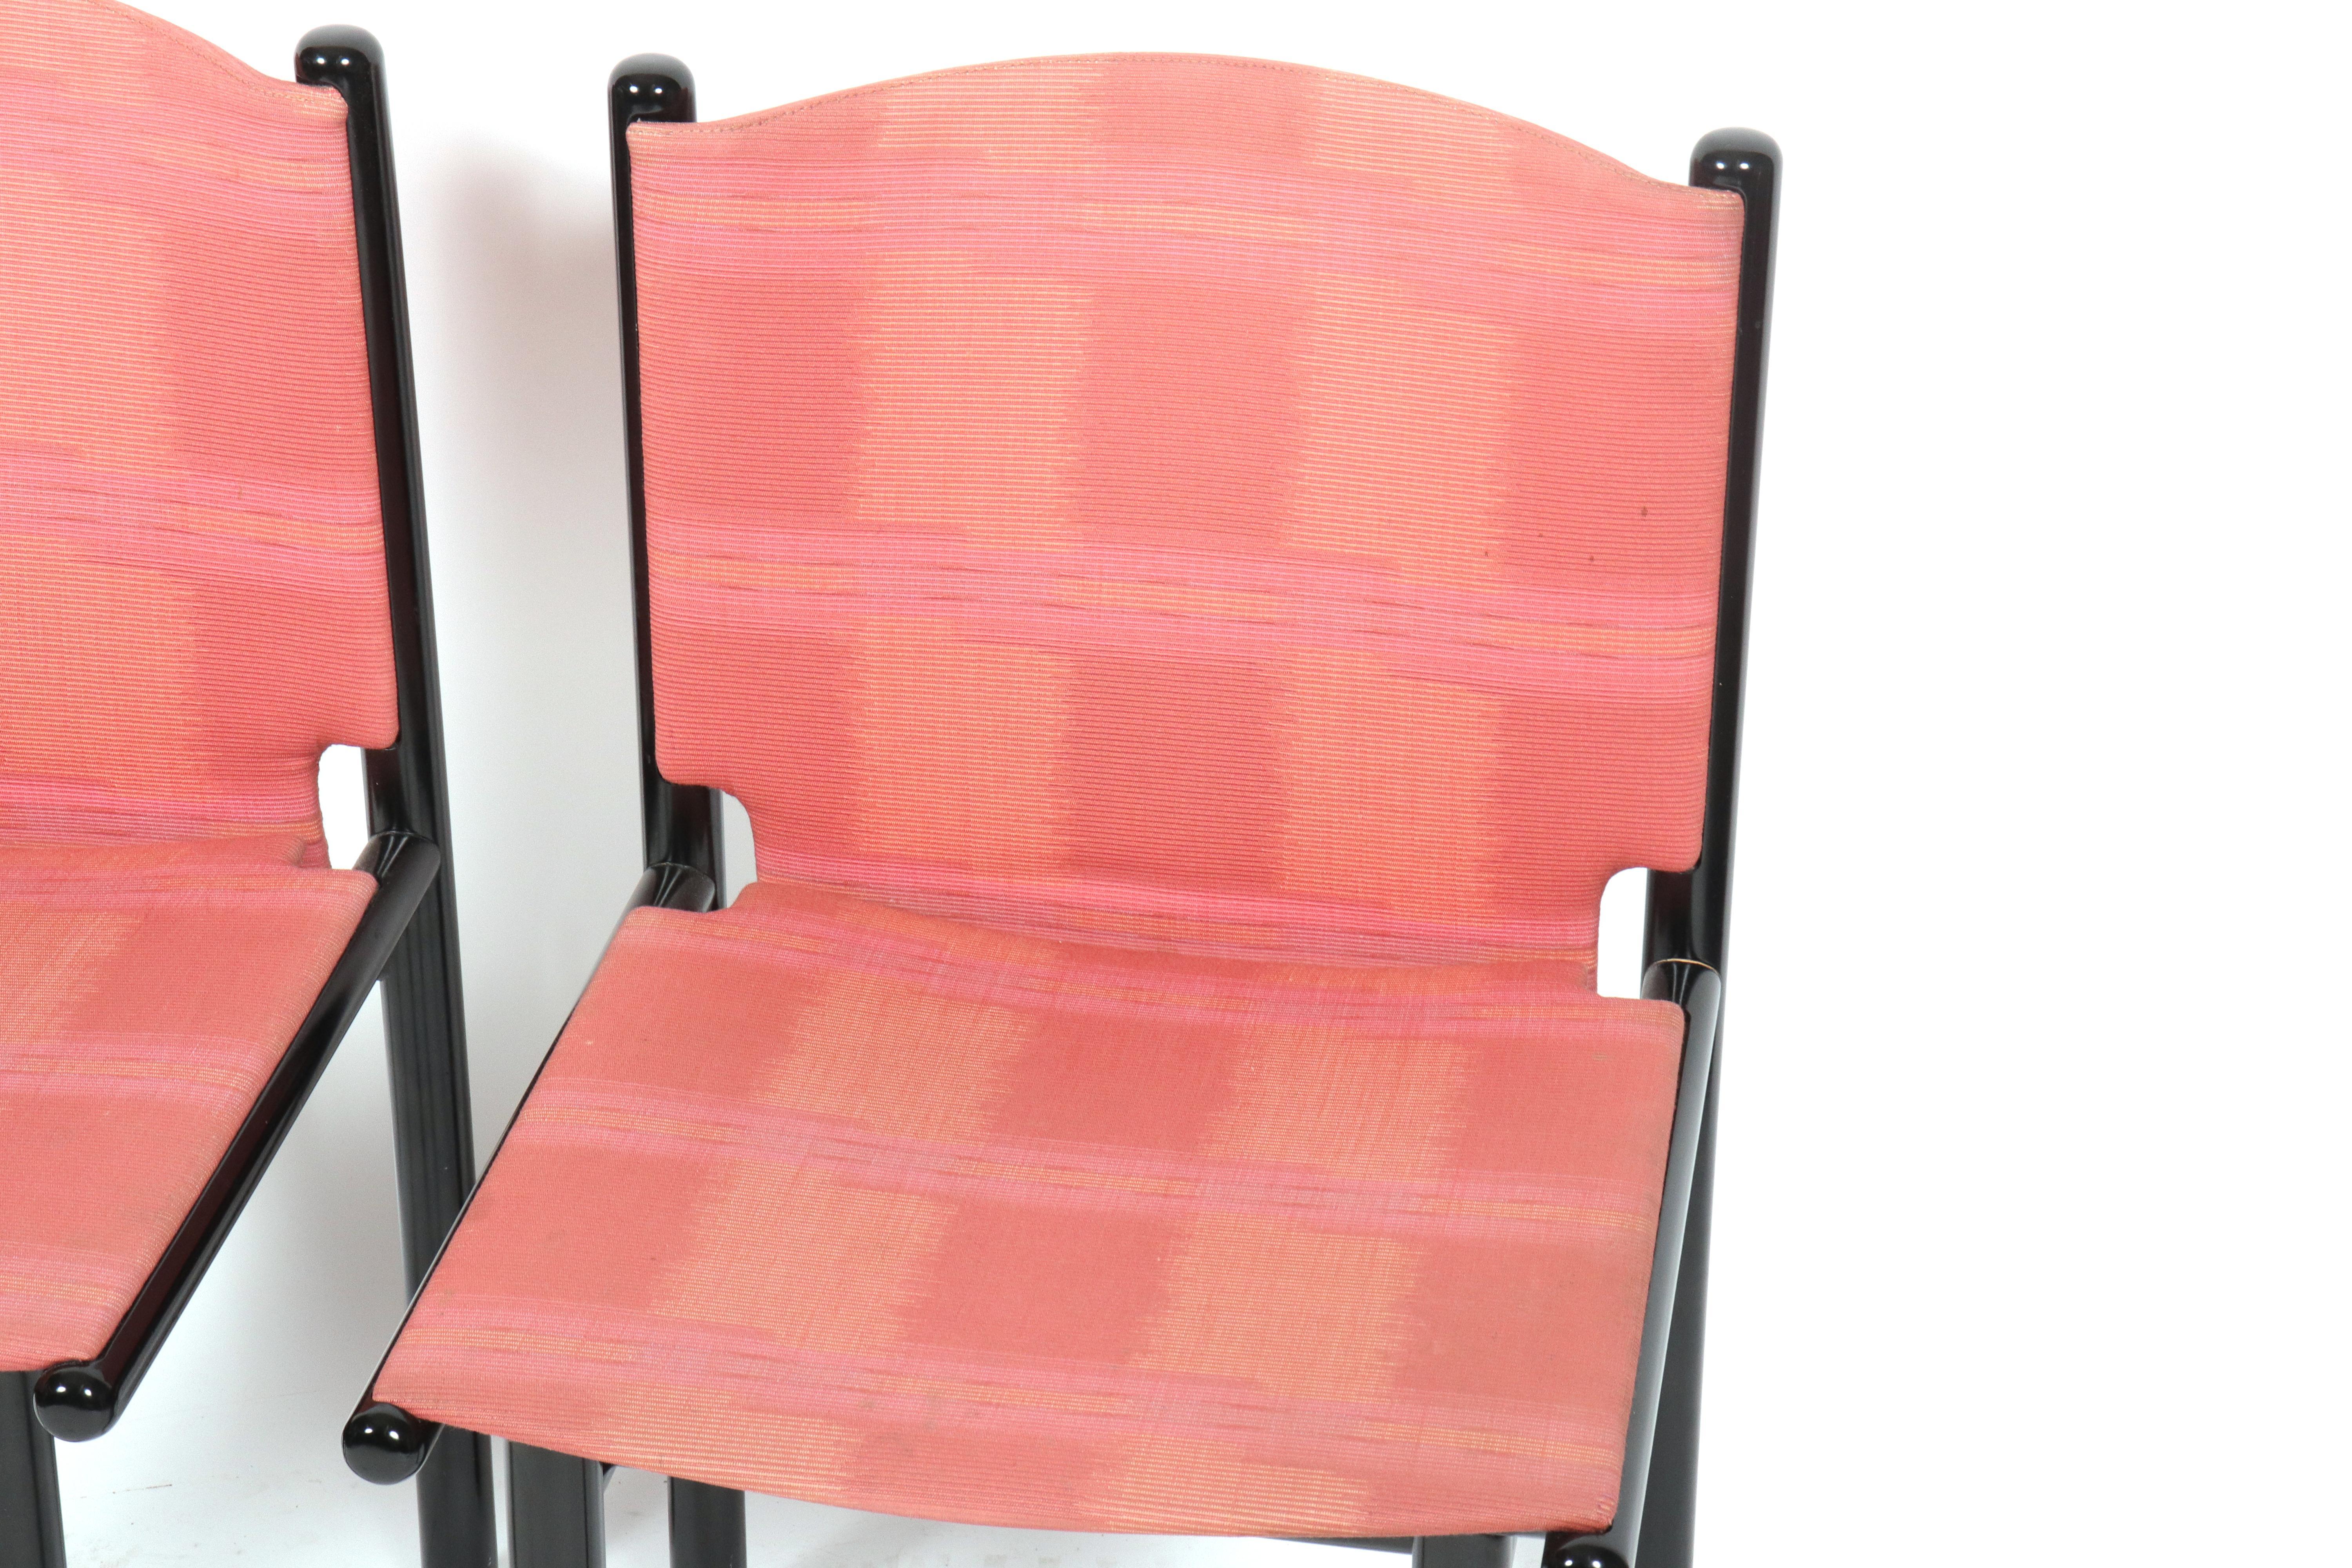 Cassina Caprile dining chair by Gianfranco Frattini. Gorgeous original woven textile with shades of pink and peach. Lovely lacquered wood frame. Labeled. Gianfranco Frattini realized this design after working on the Hilton Tokyo project in Japan.